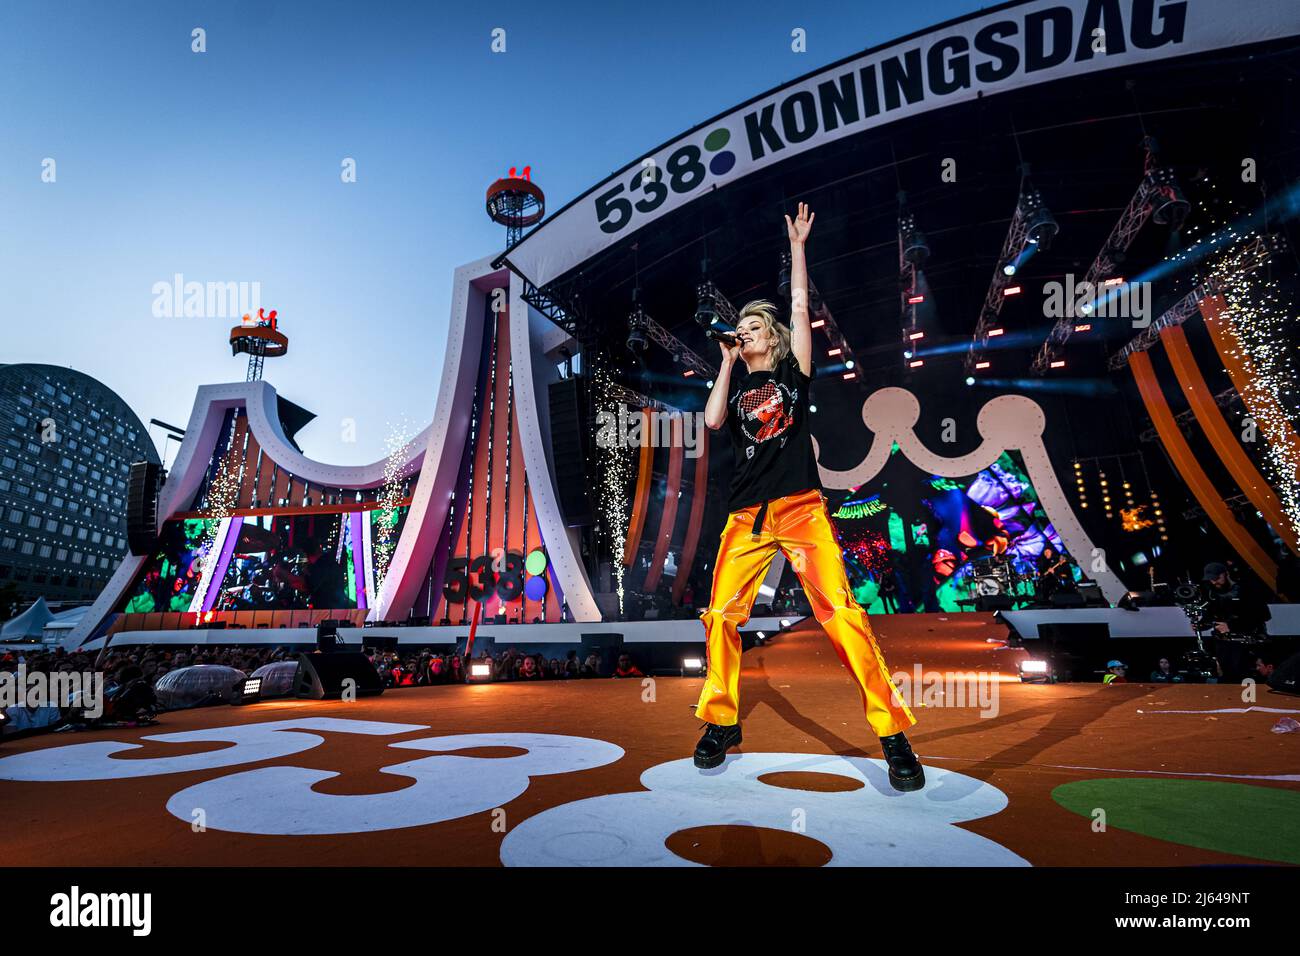 2022-04-27 20:54:53 BREDA - Davina Michelle performs during the King's Day  party of Radio 538 on the Chasseveld. Due to the corona pandemic, the event  took place digitally for the past two